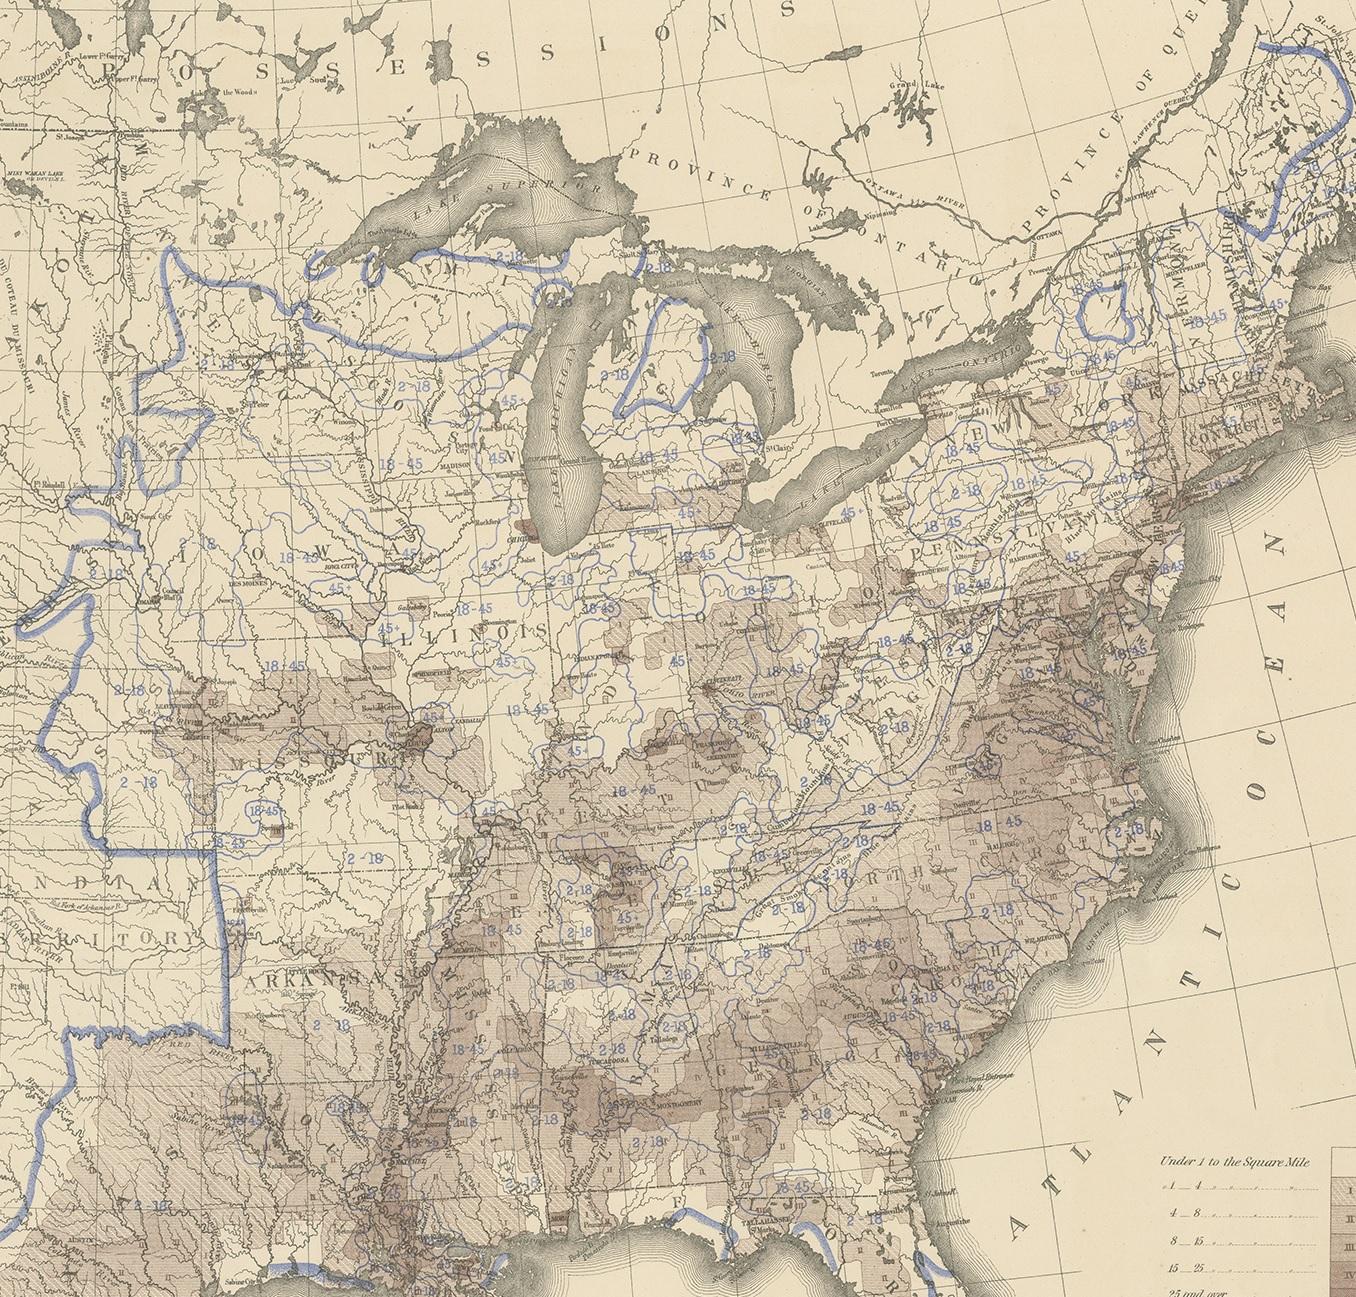 1870 us map